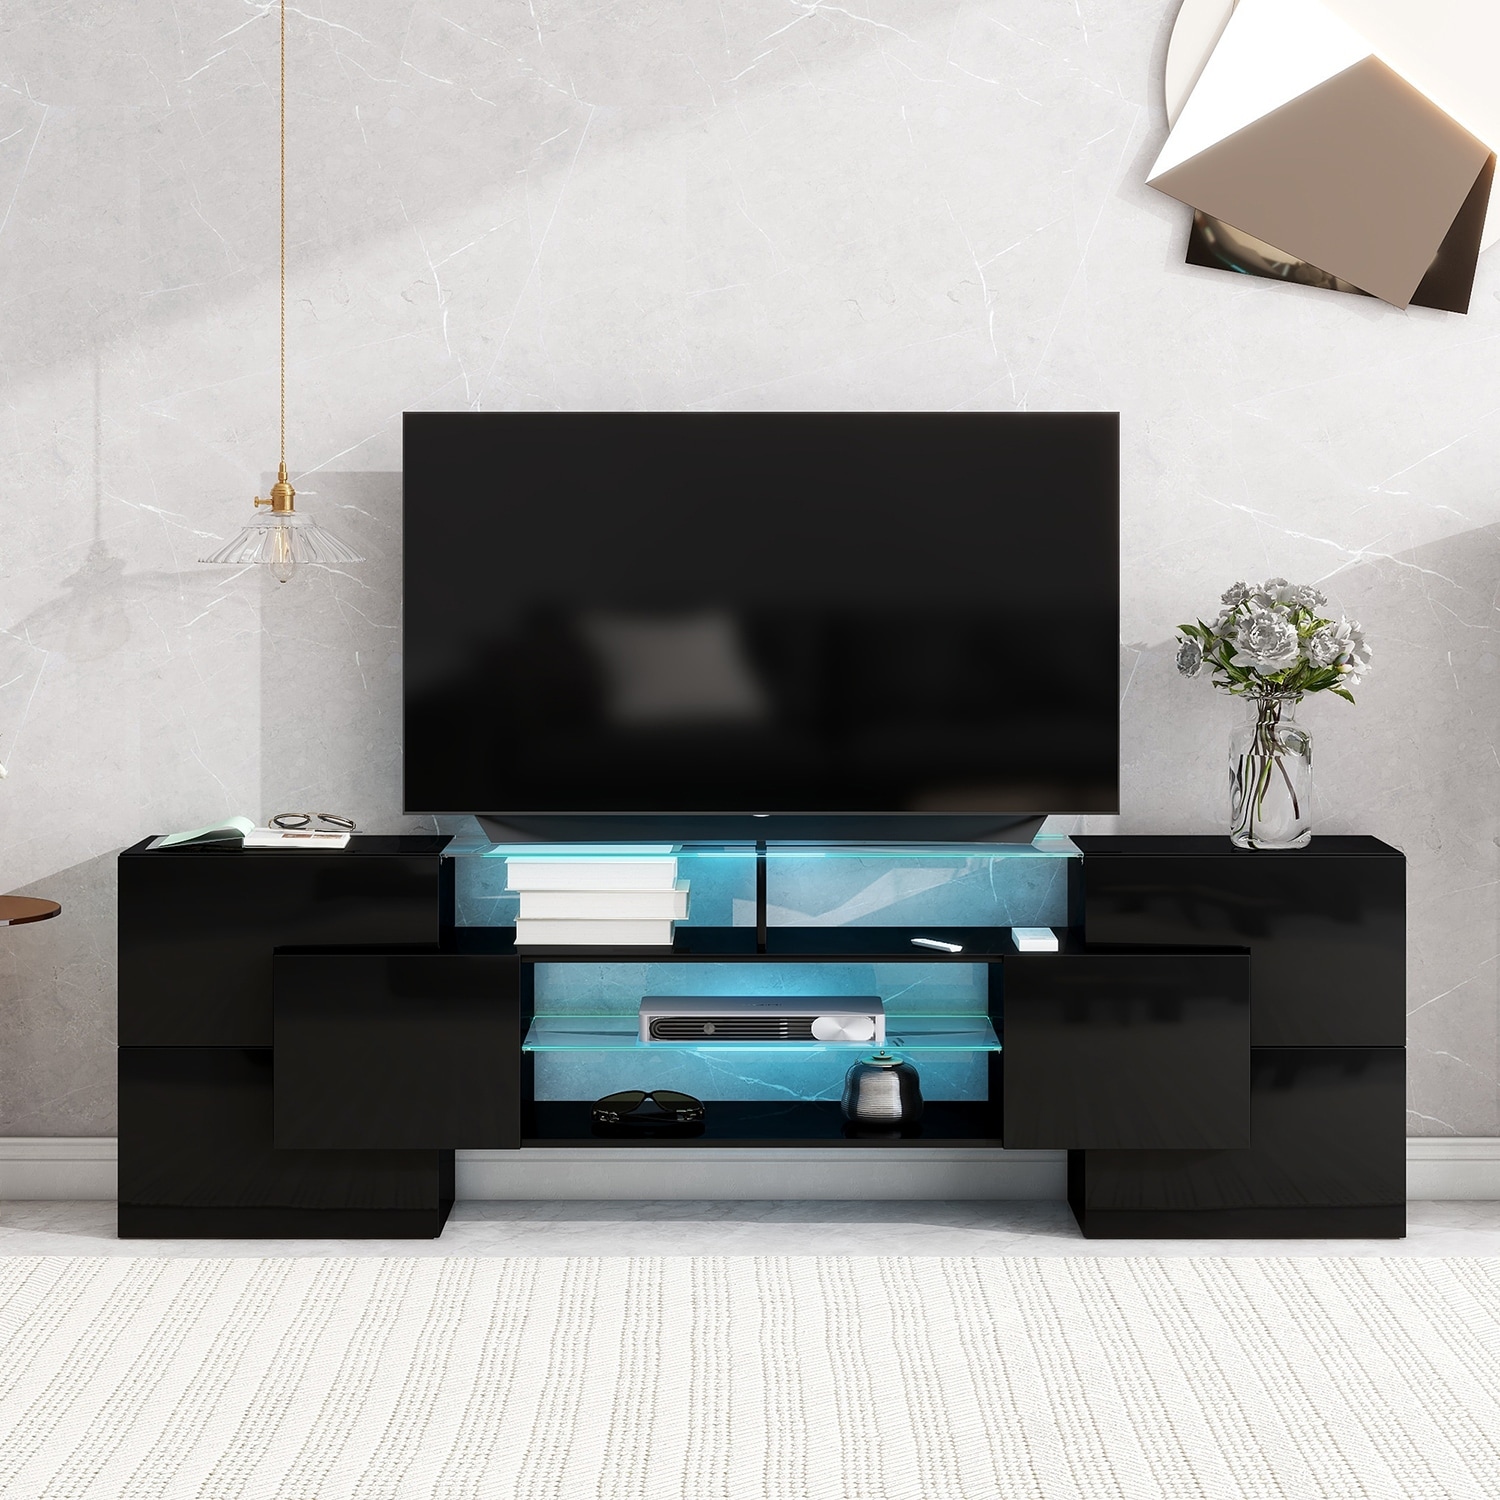 Unique Shape Tv Stand With 2 Illuminated Glass Shelves